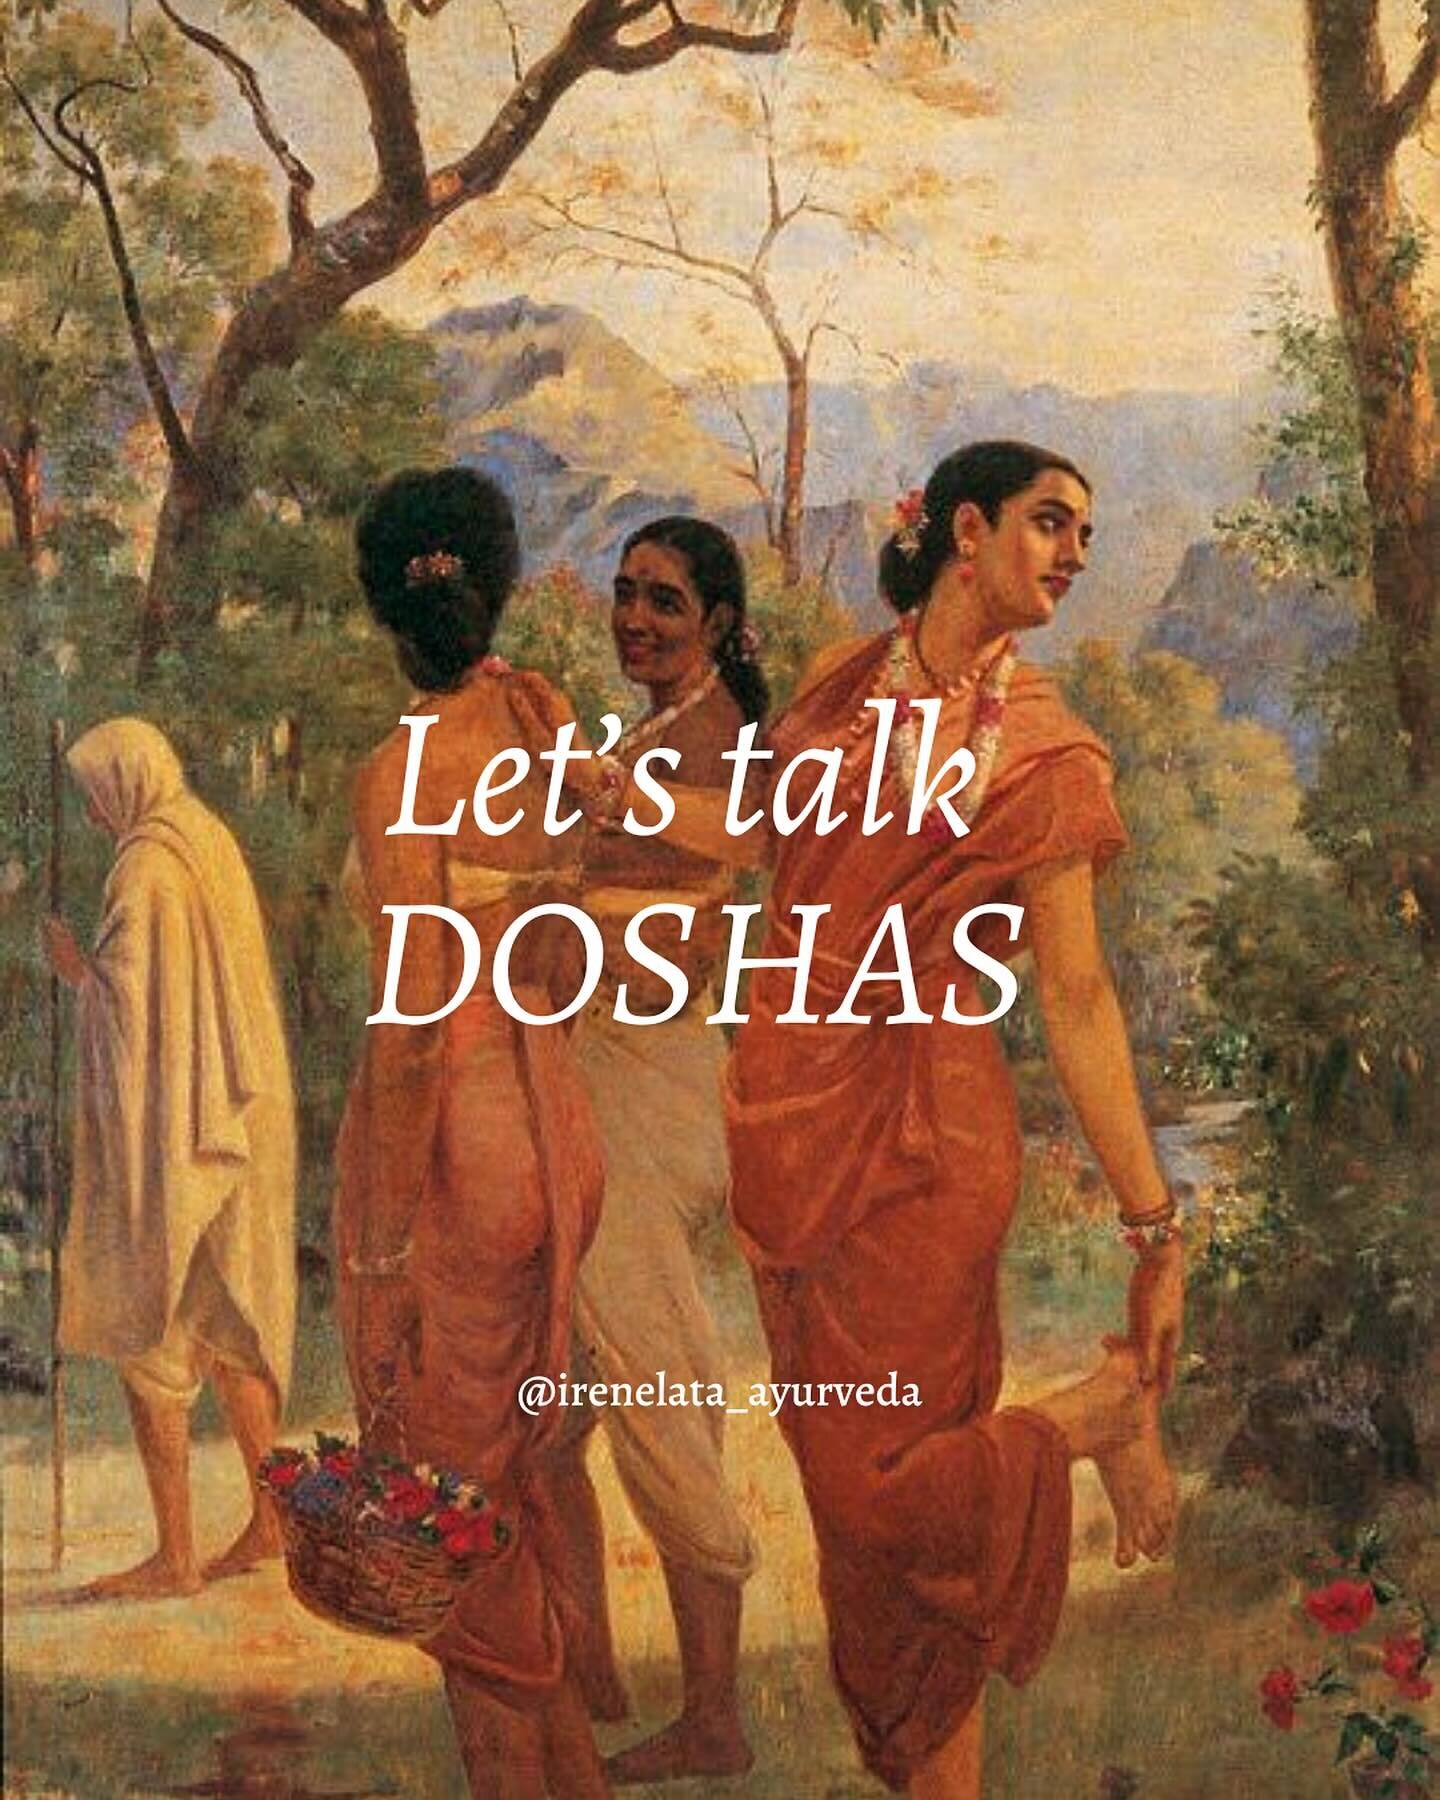 ✨Let&rsquo;s talk doshas✨

Anyone who starts learning about Ayurveda wants to know what their dosha is! 

The 3 doshas - vata, pitta, and kapha are a combination of the 5 elements (earth, water, fire, air, and ether).

Dosha refers to your mind/body/